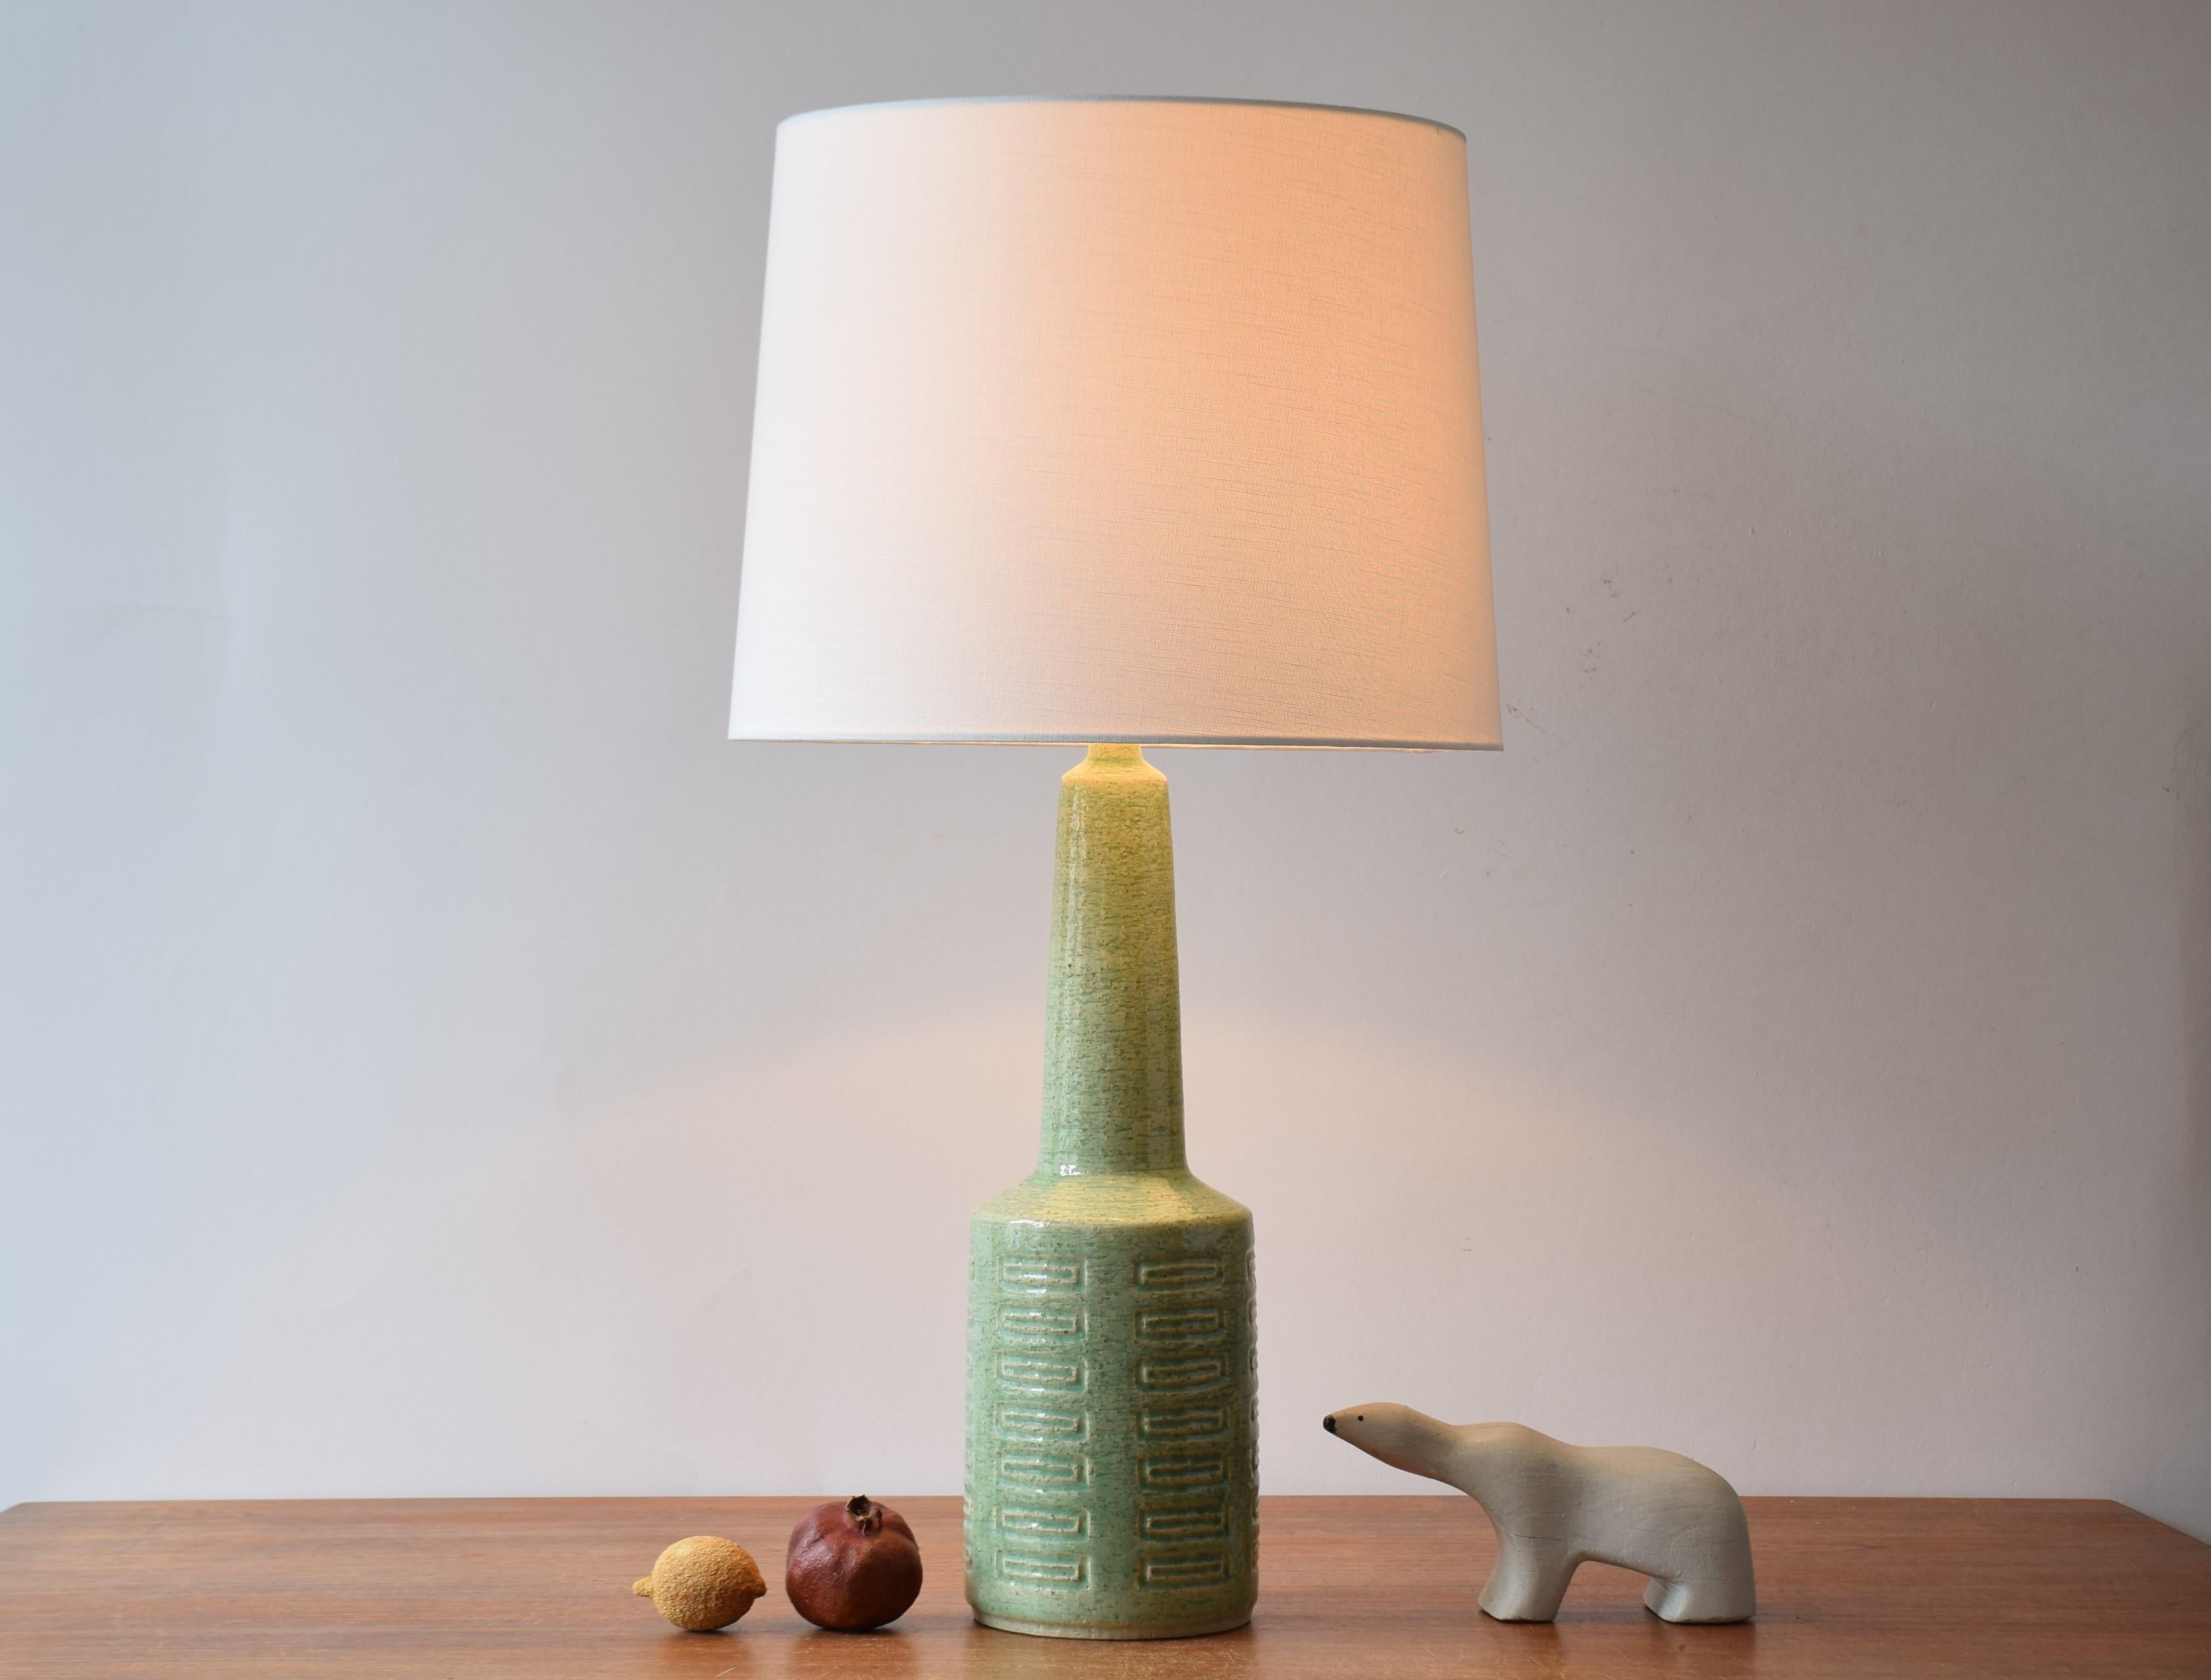 Tall Mid-century Danish ceramic table lamp from Palshus with pale green glaze.
The lamp was designed by Per Linnemann-Schmidt and manufactured in their own studio circa 1960s or early 1970s.
It is made with chamotte clay which gives a rough and